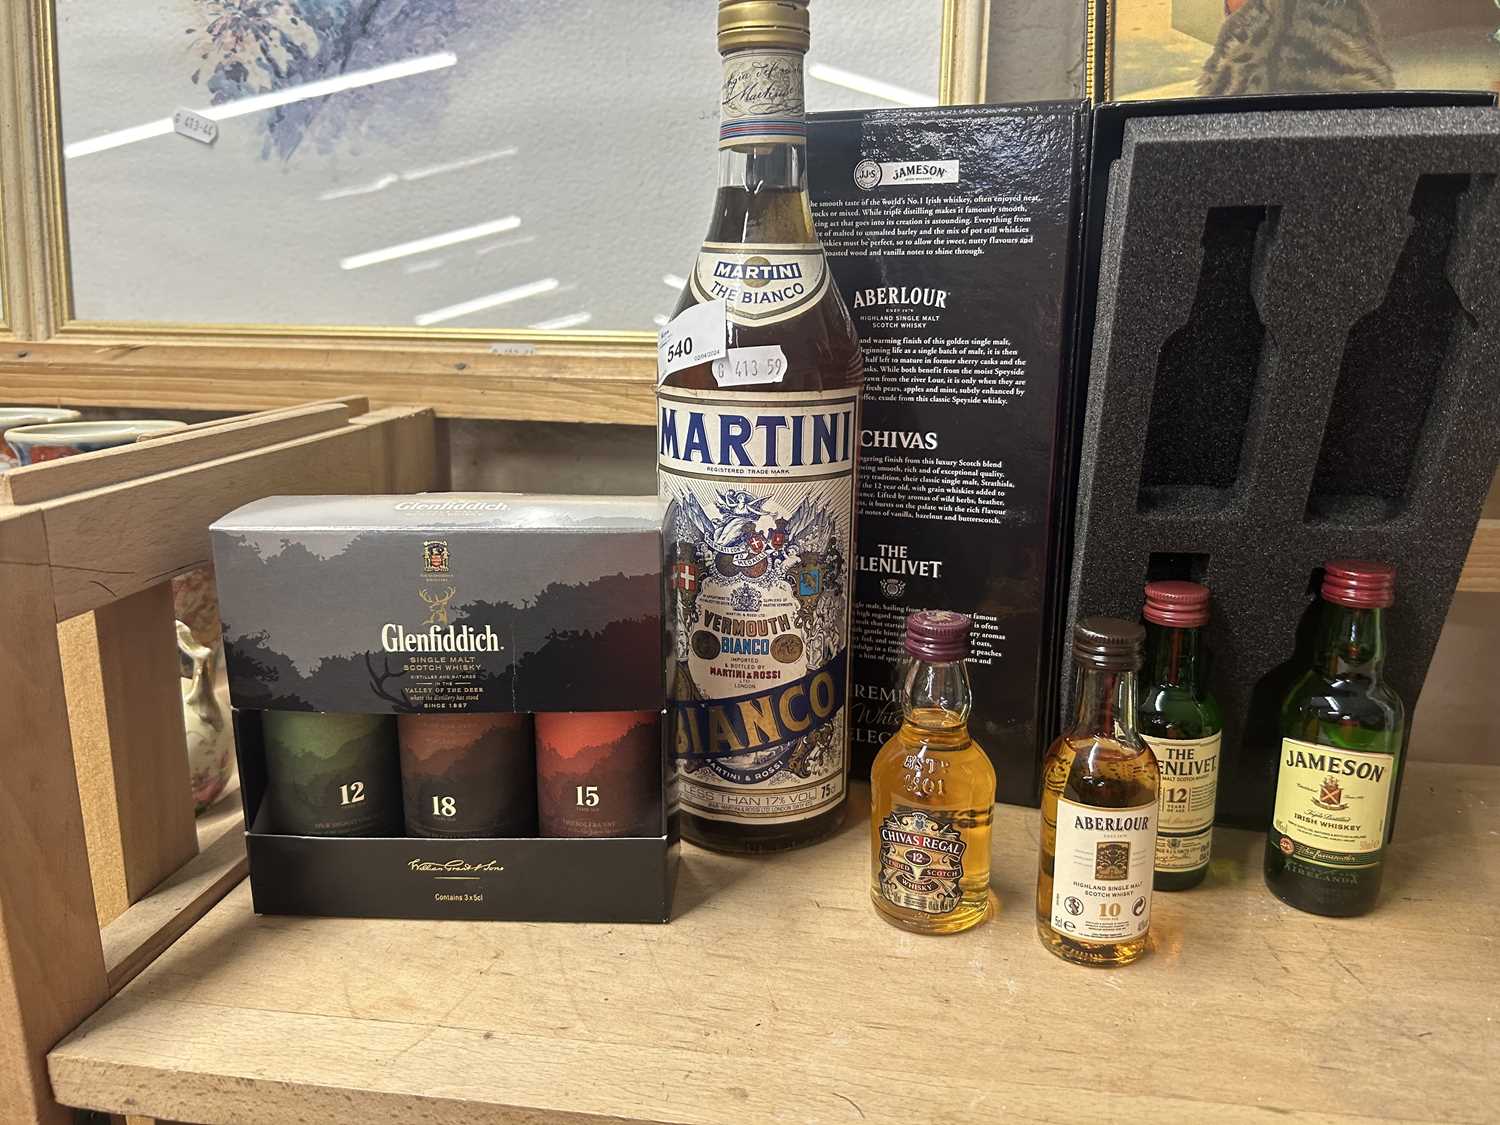 Mixed Lot: Boxed miniature whisky bottles together with a bottle of Martini